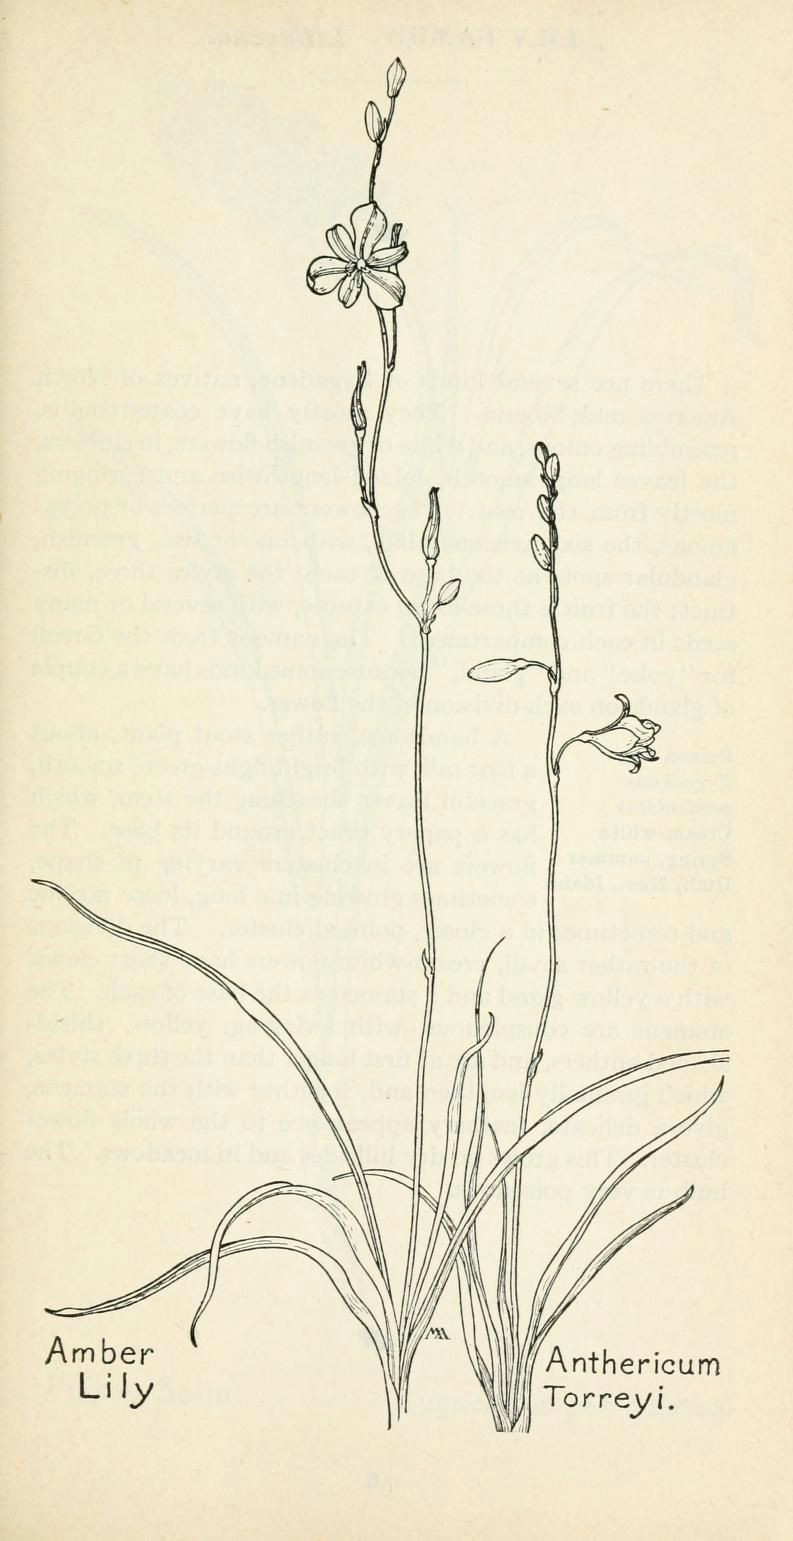 Drawing Of Grass Flowers Field Book Of Western Wild Flowers Botanical Illustration Wild